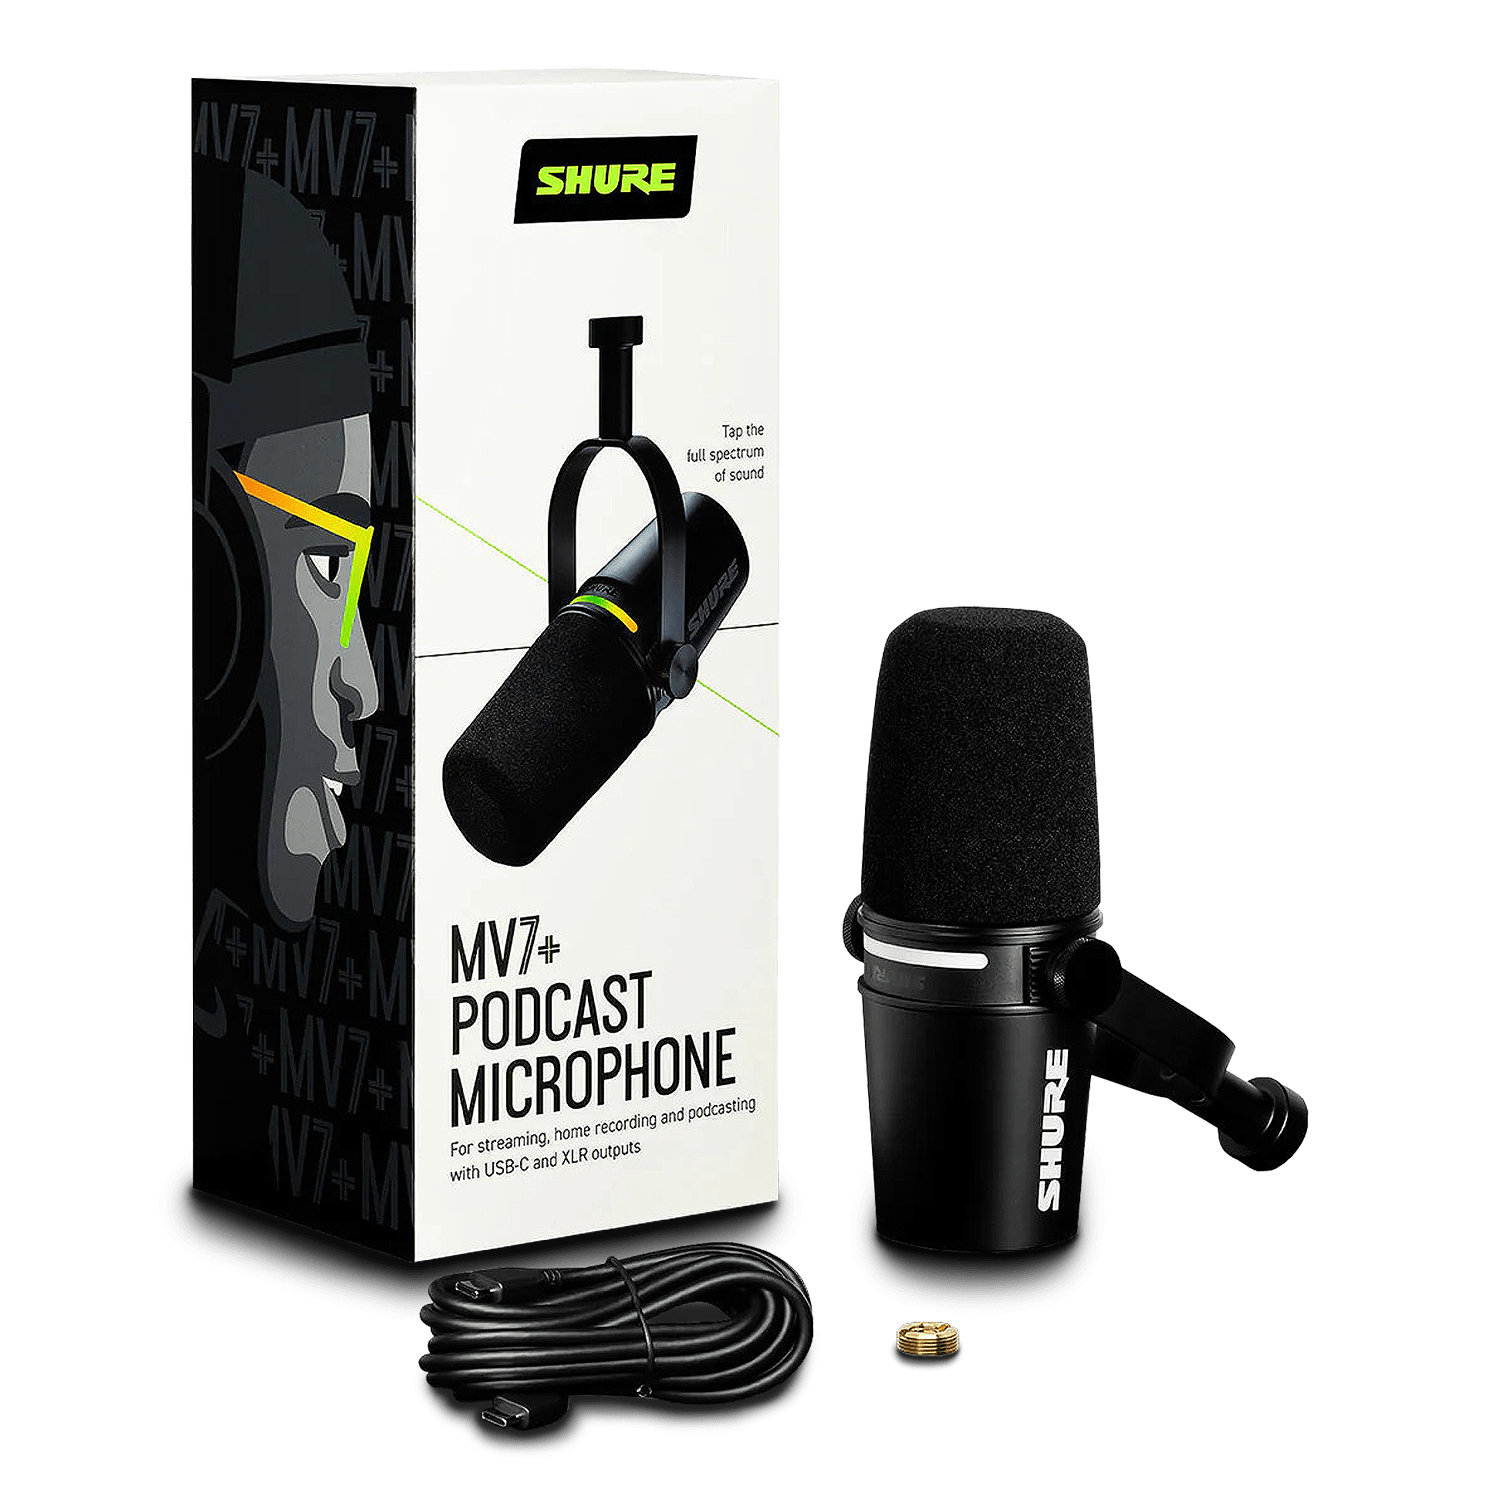 Shure MV7+ Podcast Microphone for Streaming, Home Recording, and Podcasting with USB-C and XLR Outputs